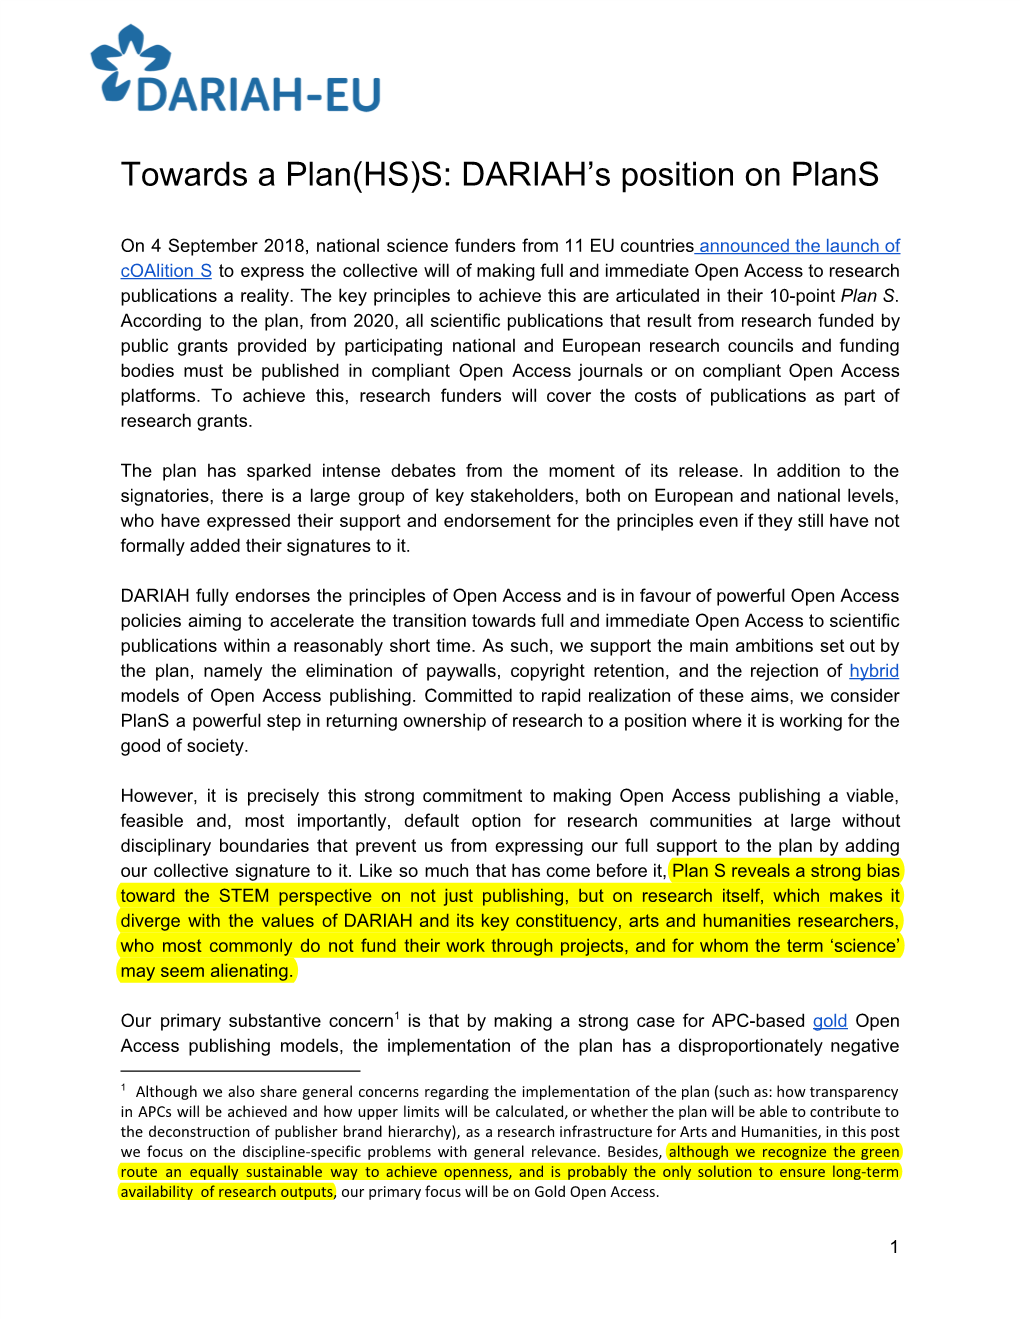 Towards a Plan(HS)S: DARIAH's Position on Plans